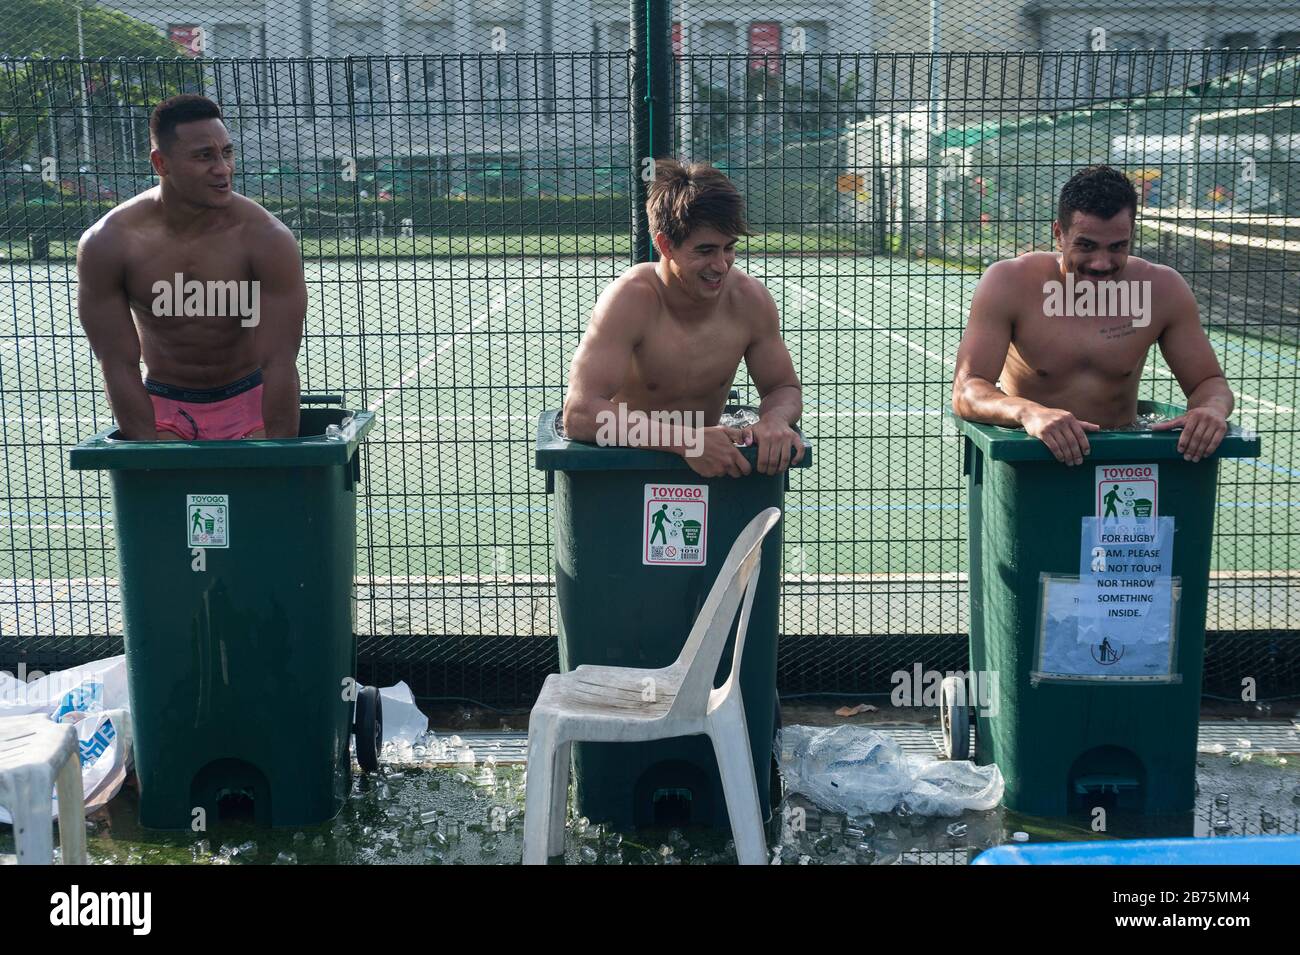 04.11.2017, Singapore, Republic of Singapore, Asia - After a game at the Rugby Sevens Tournament, three players of the Australian rugby team Casuarina Cougars cool down in garbage cans filled with ice water.     Use for editorial purposes only [automated translation] Stock Photo